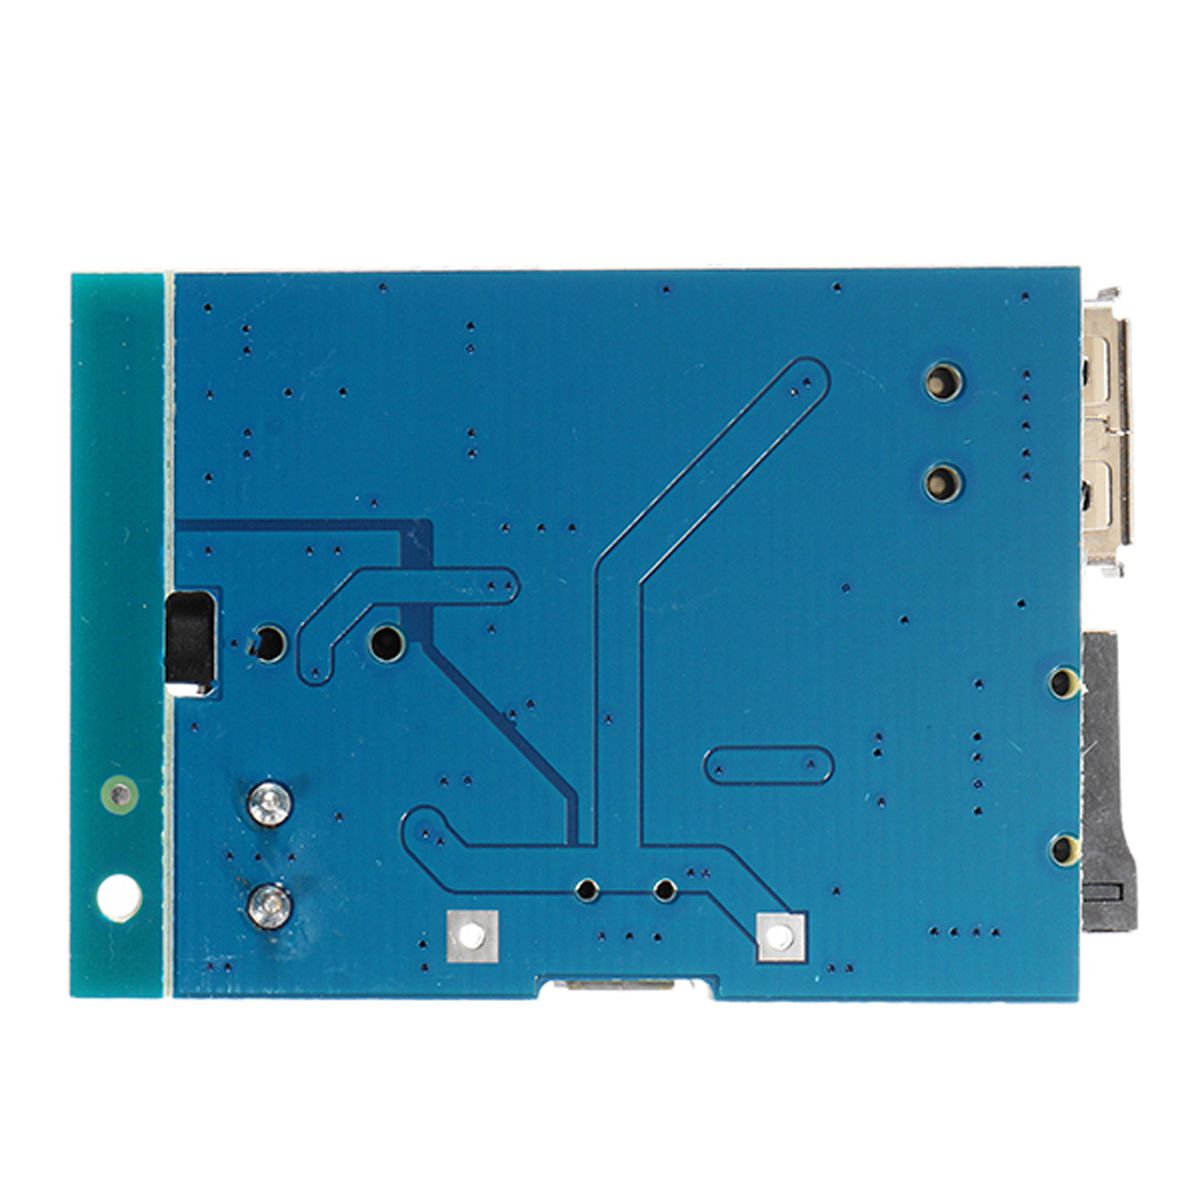 20pcs-MP3-Lossless-Decoder-Board-With-Power-Amplifier-Module-TF-Card-Decoding-Player-1366969